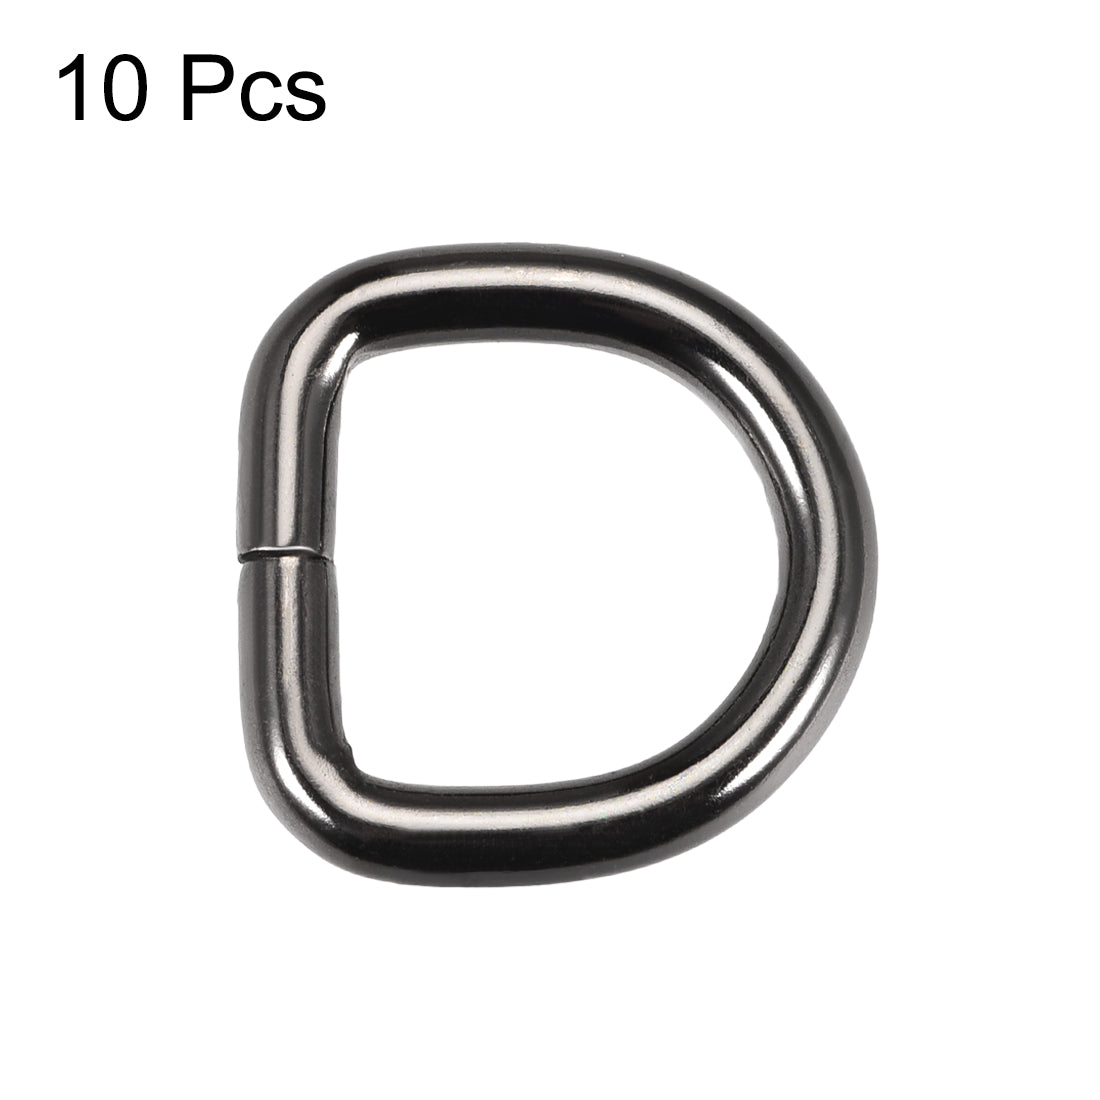 uxcell Uxcell 10 Pcs D Ring Buckle 0.8 Inch Metal Semi-Circular D-Rings Black for Hardware Bags Belts Craft DIY Accessories